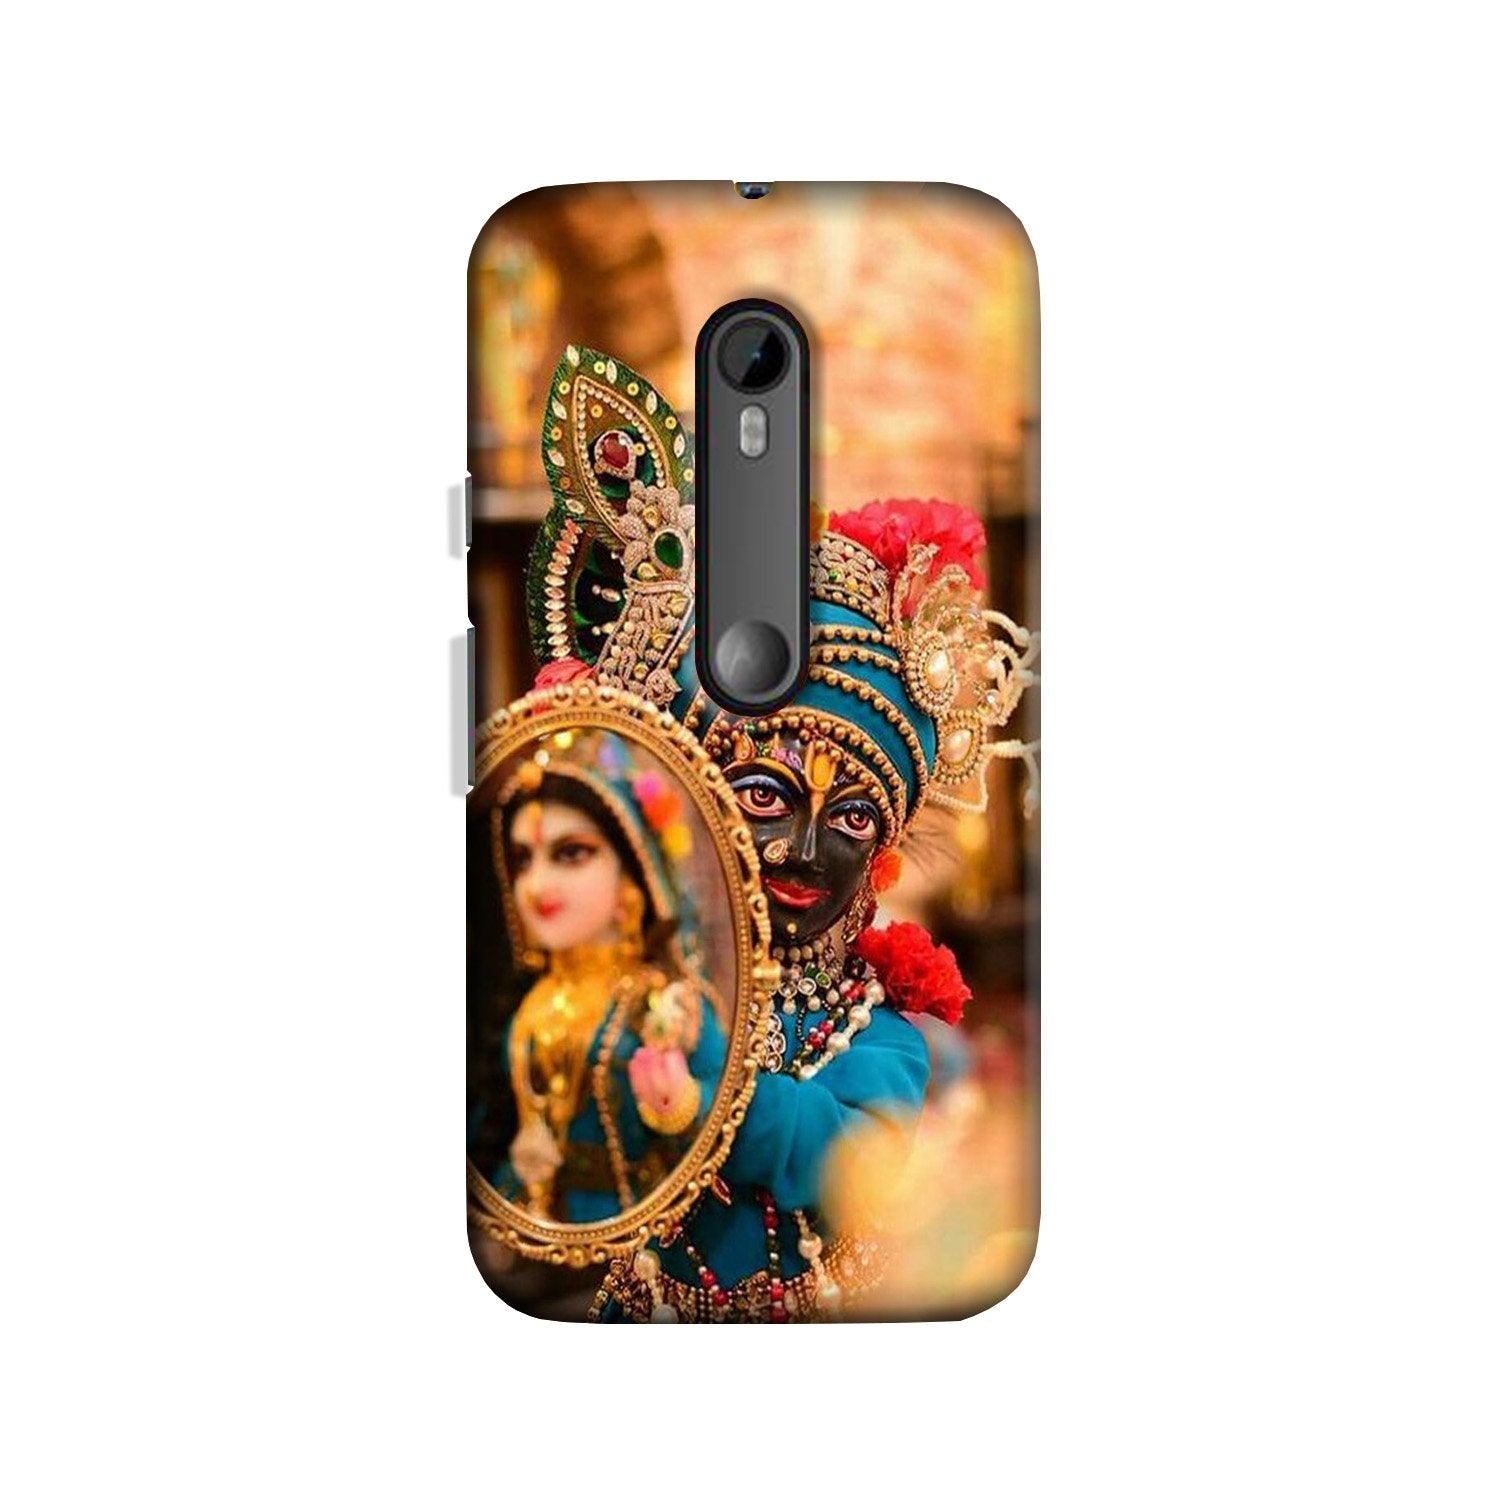 Lord Krishna5 Case for Moto X Play